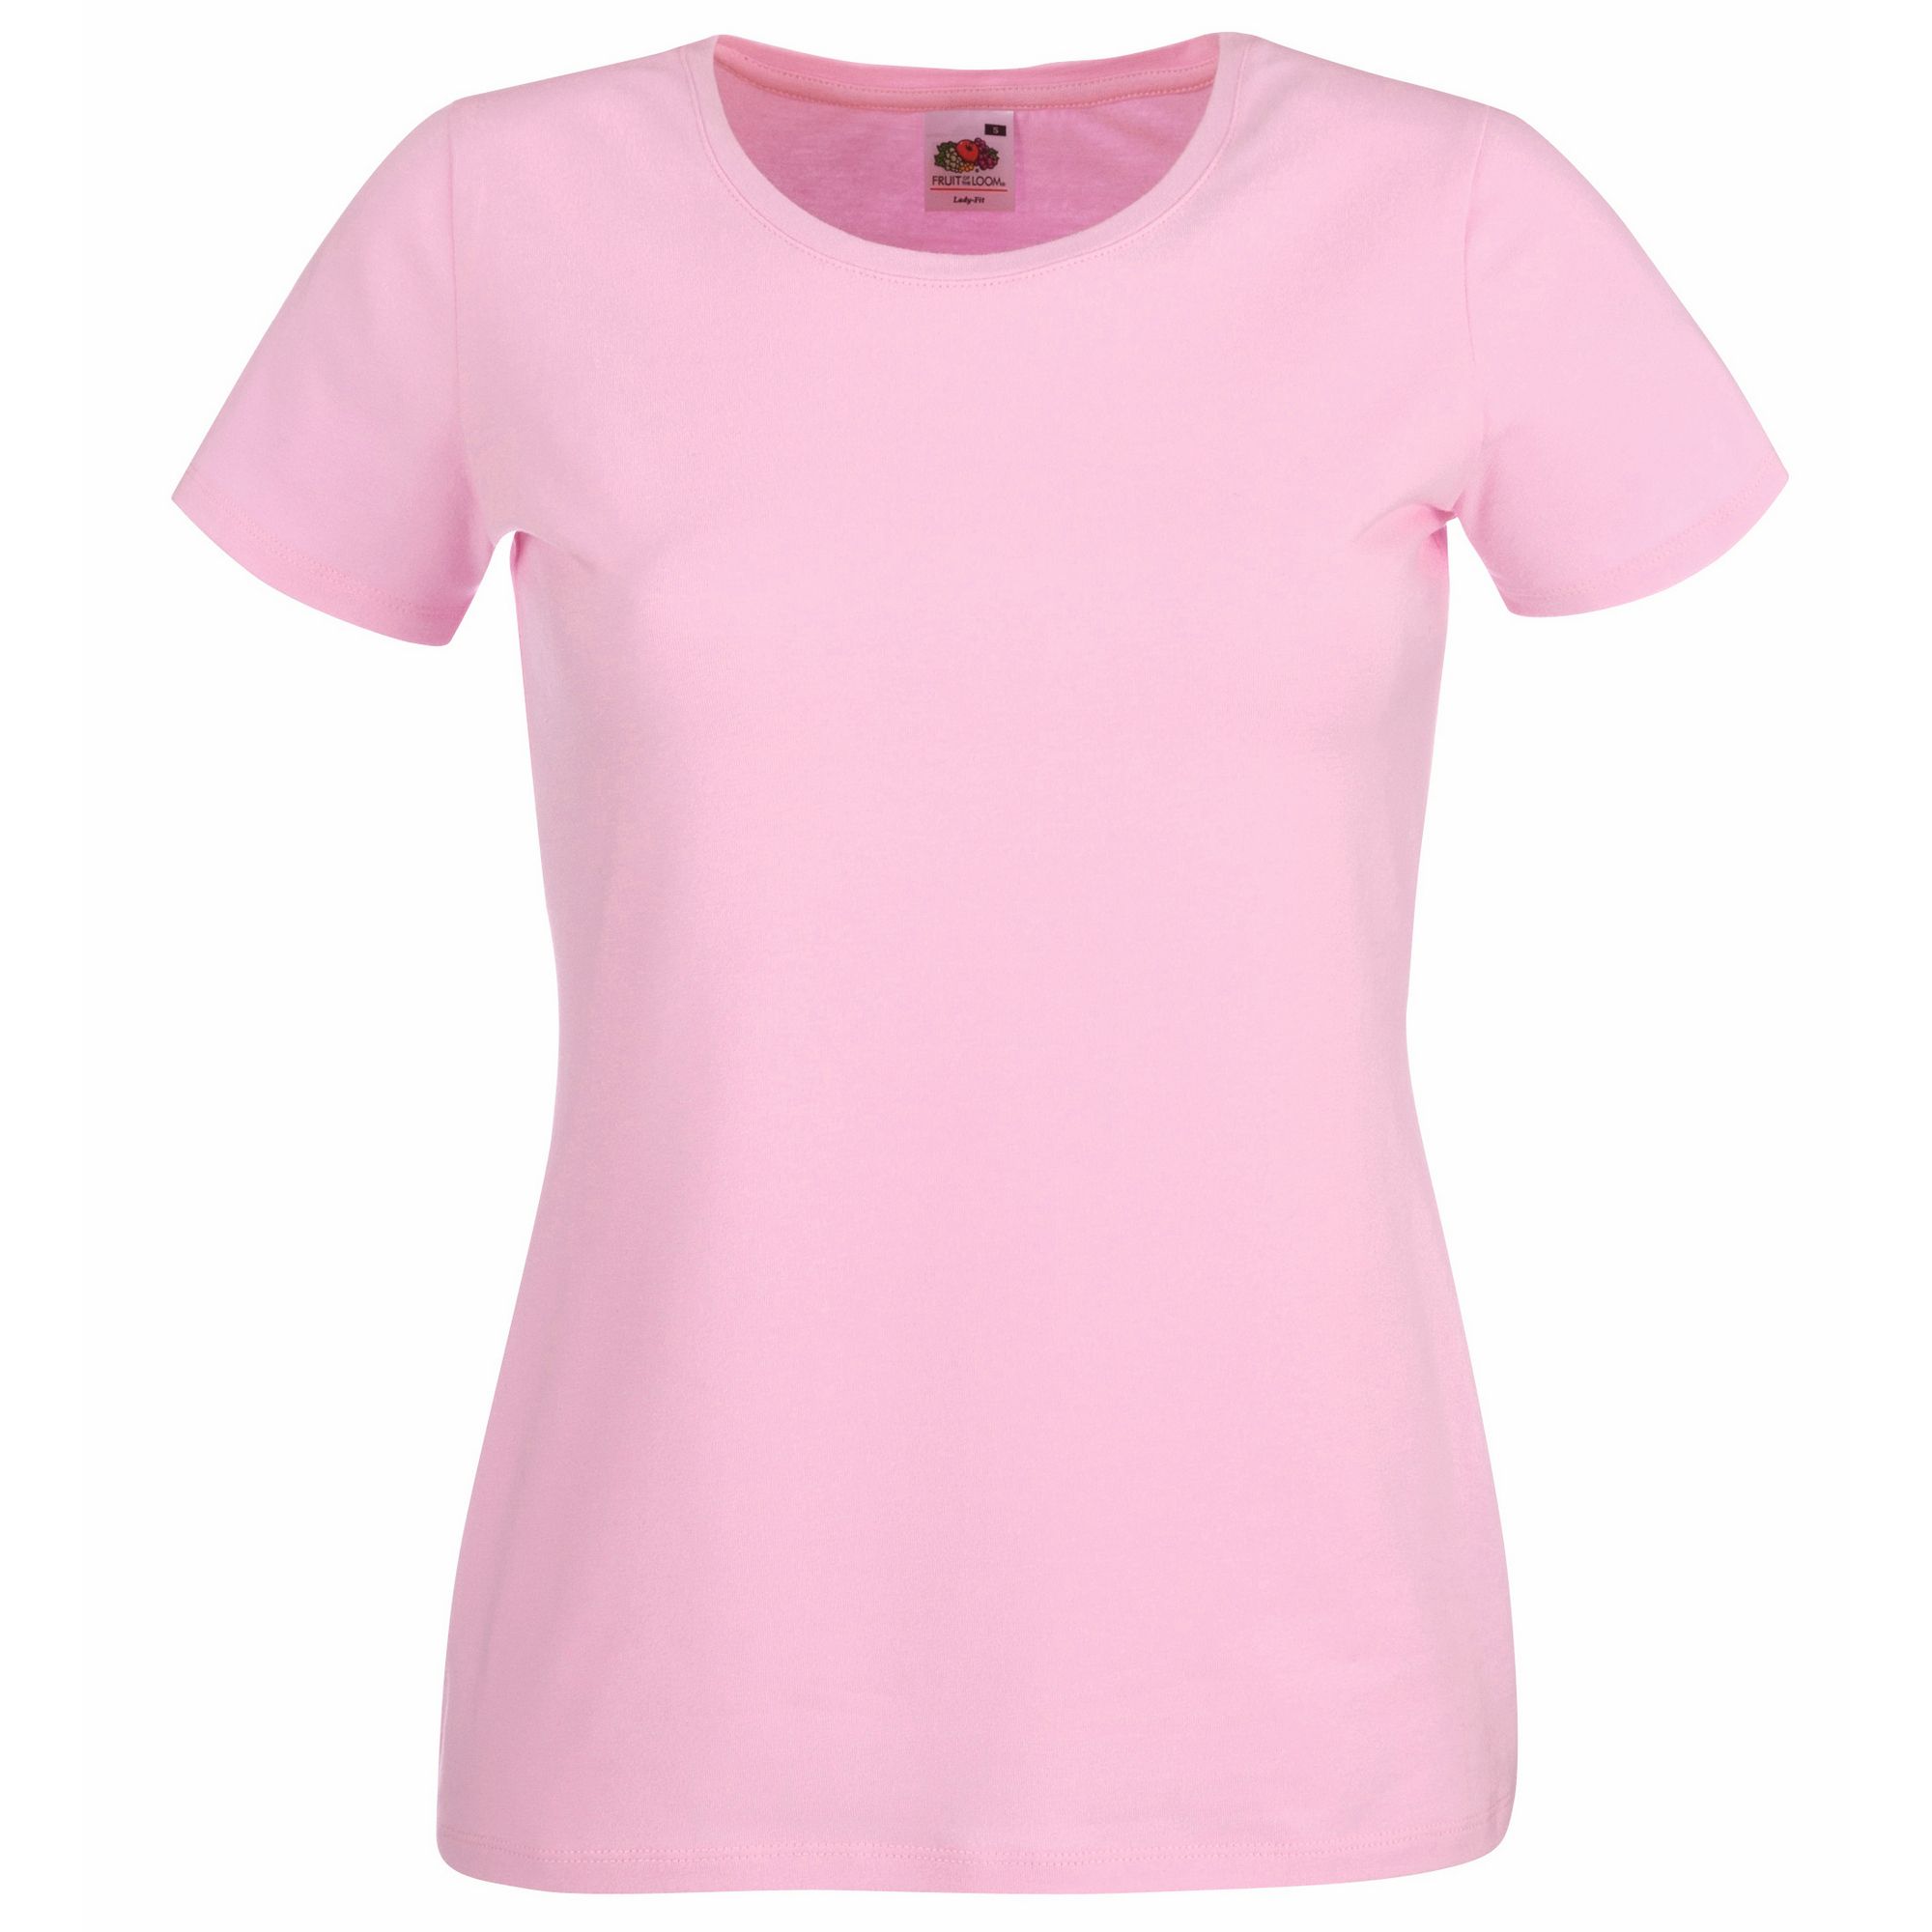 New fit and longer body length.  Flattering feminine neckline with self fabric trim.  Soft stretchy cotton/elastane fabric and shaped side seams for a feminine fit.  Also available in mens sizes code 61262.  Weight: 200-210g/m². Fabric: 95% cotton 5% elastane. XS (8: Dress Size). S (10: Dress Size). M (12: Dress Size). L (14: Dress Size). XL (16: Dress Size). <BR><BR>FRUIT OF THE LOOM - a brand steeped in tradition, offering a comprehensive range of garments.